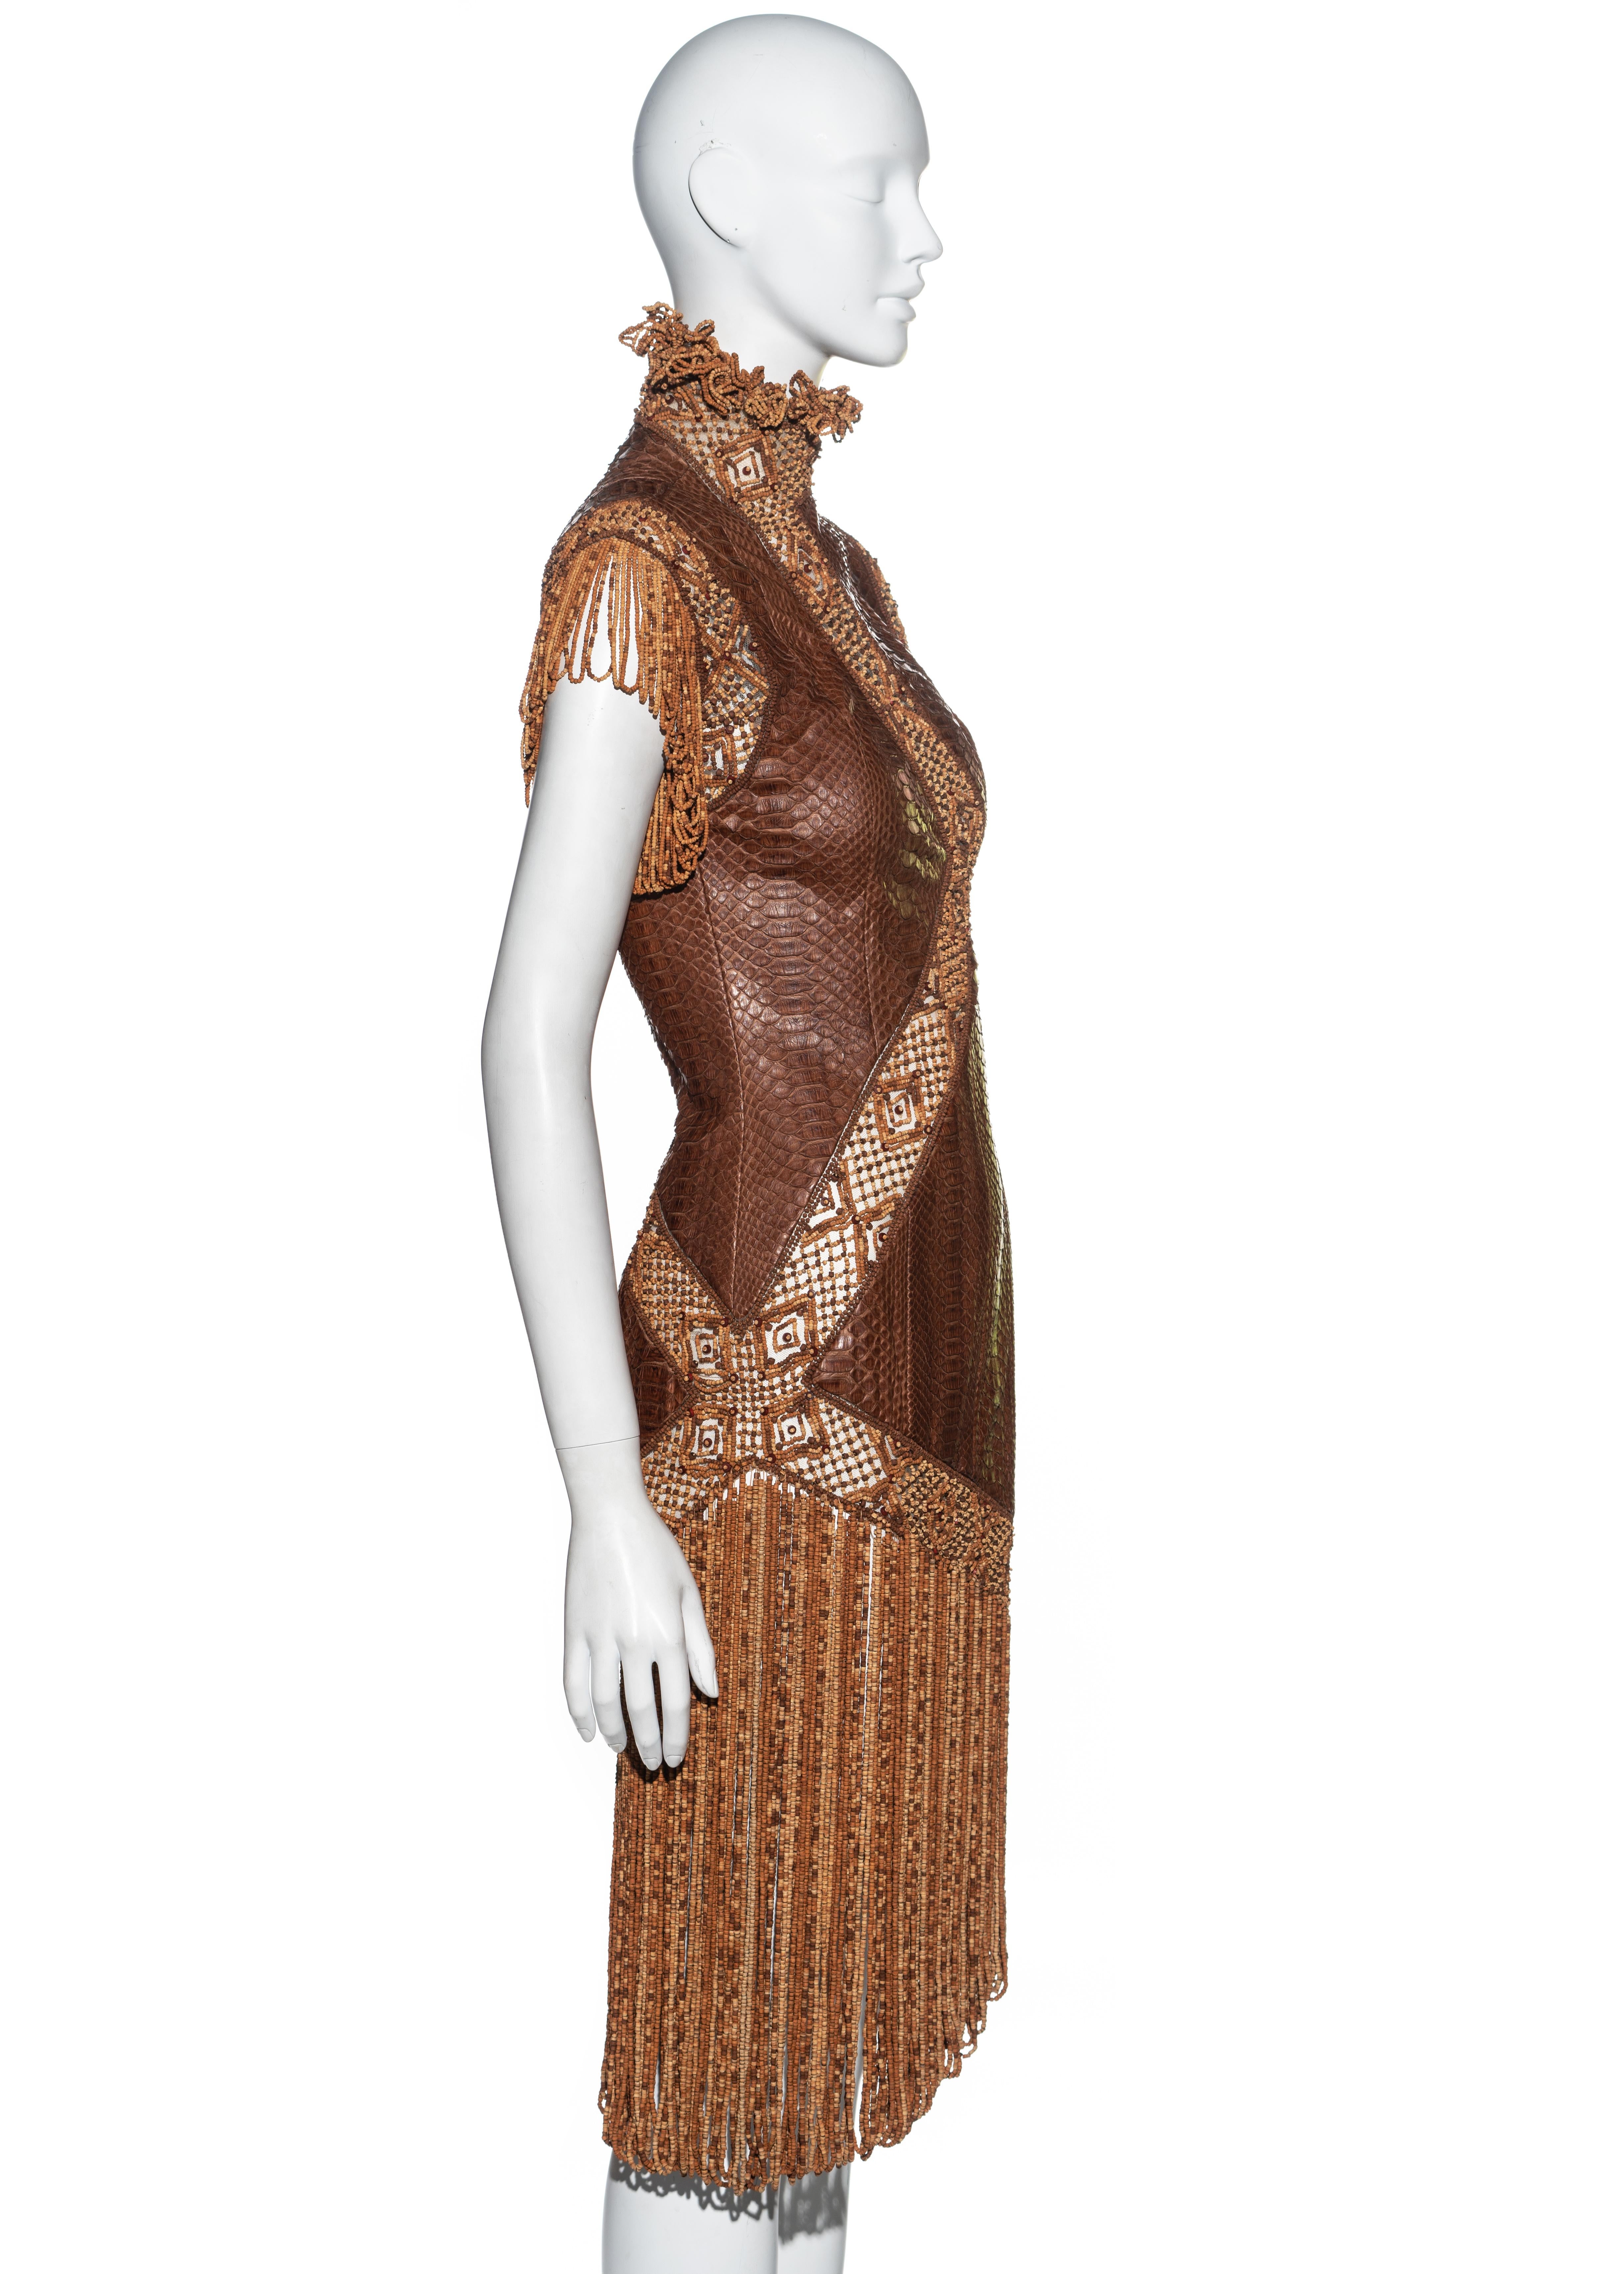 Women's Givenchy by Alexander McQueen Haute Couture brown snakeskin dress, ss 2001